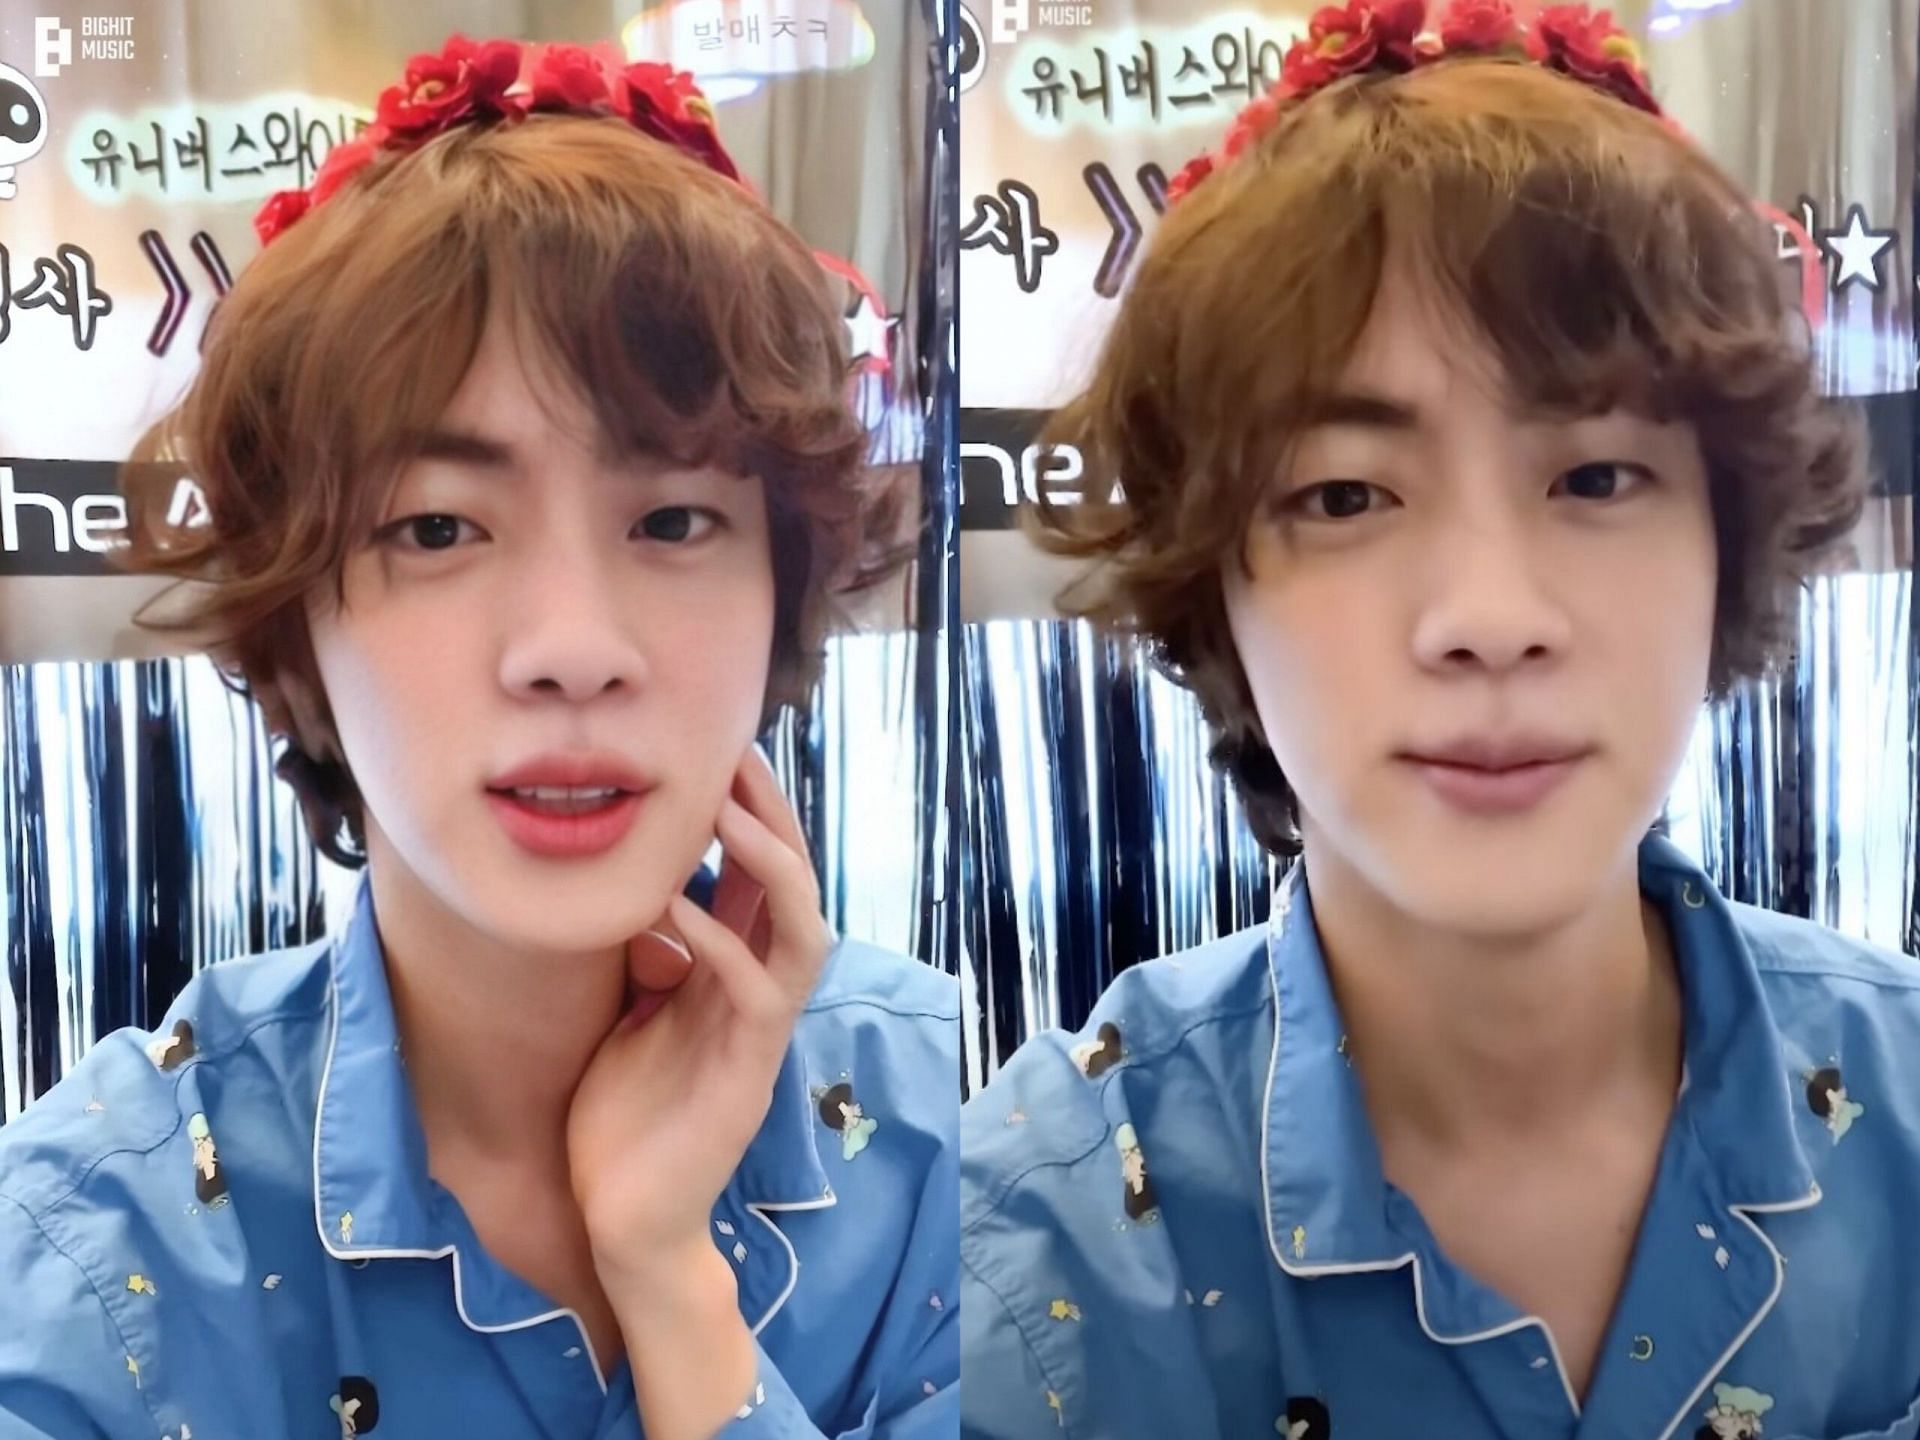 BTS&rsquo; Jin drops his final monthly video message before his return from military service in June (Image BANGTANTV/YouTube)